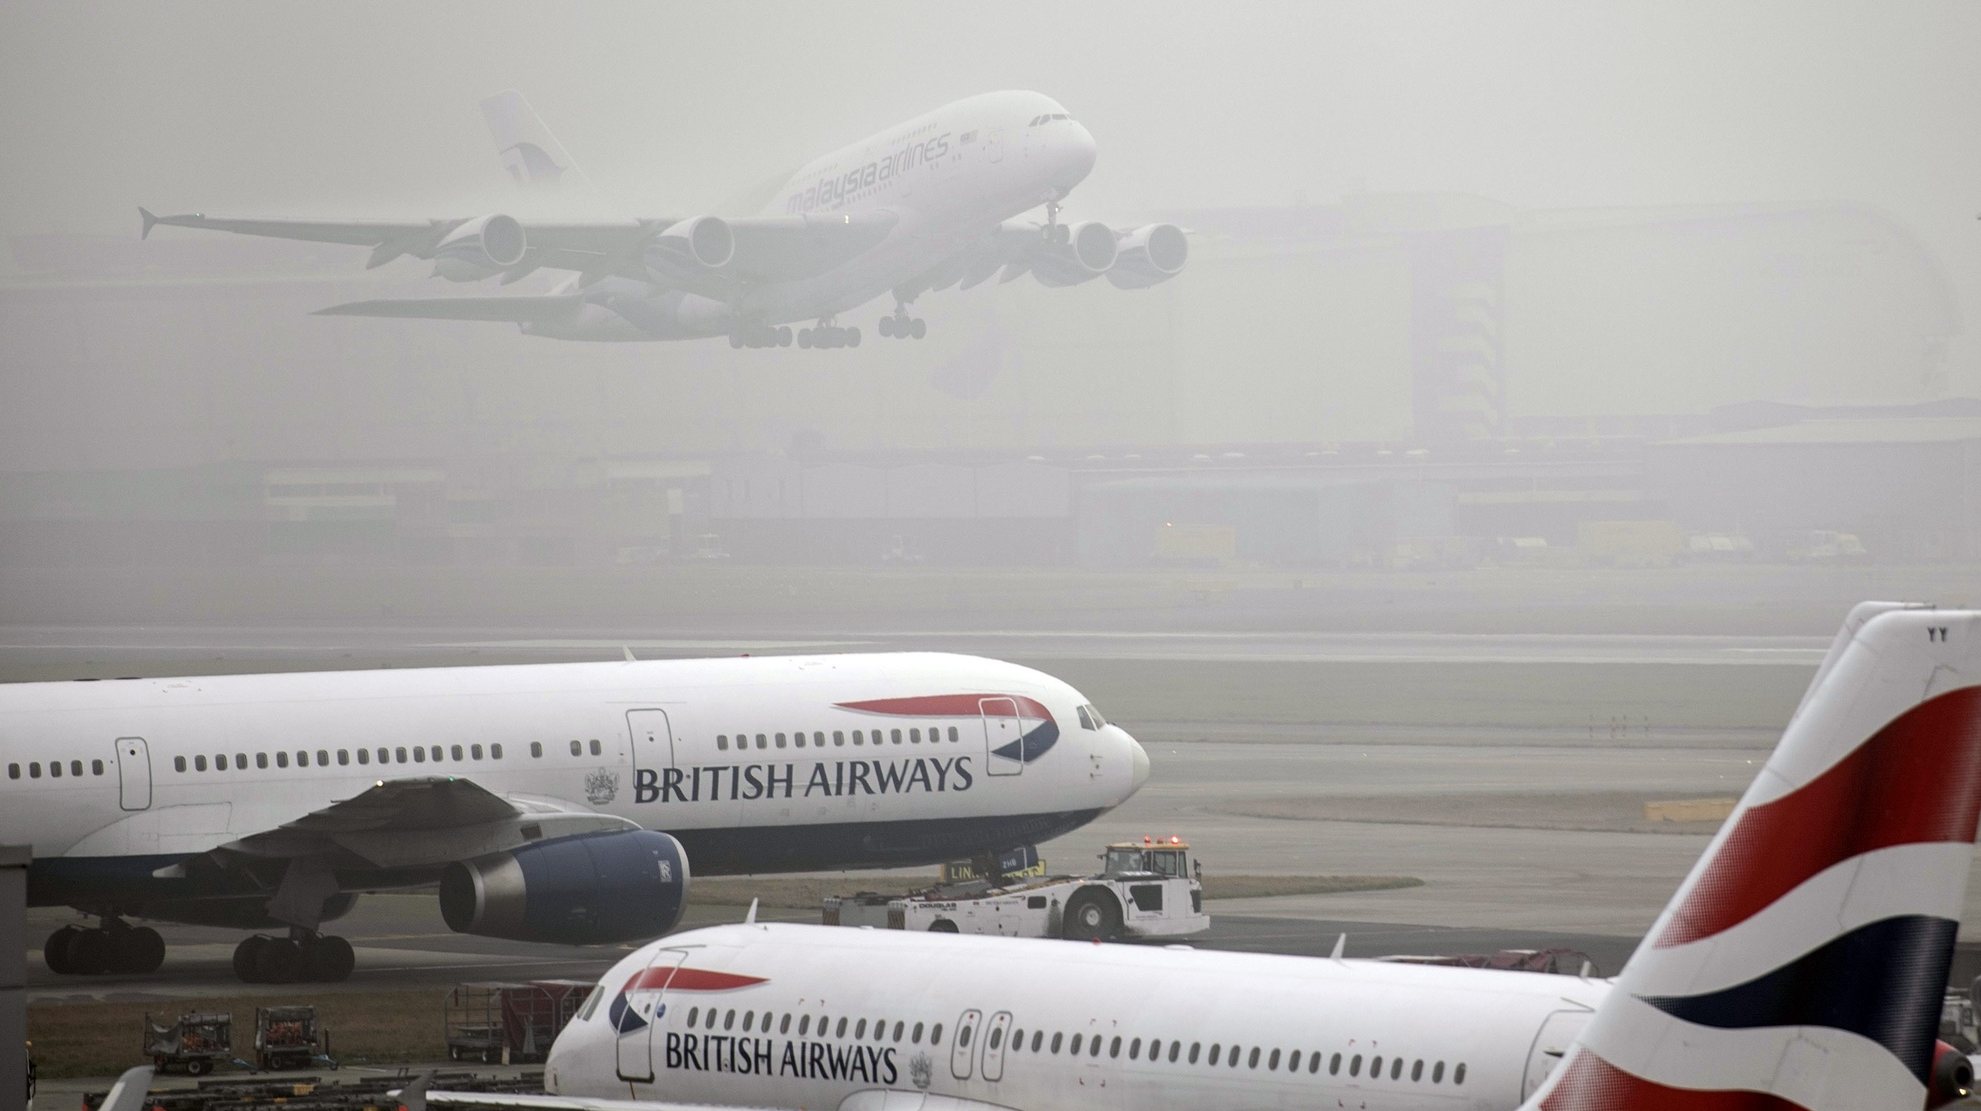 epa05744245 Planes of the British Airways airline gather on the runway as a plane of Malaysia Airlines takes off during thick fog delays departures from Terminal 5 Heathrow Airport in London, Britain, 23 January 2017. Freezing foggy weather threatens to disrupt traffic and travel plans as thick fog saw 100 flights cancelled at Heathrow.  EPA/WILL OLIVER